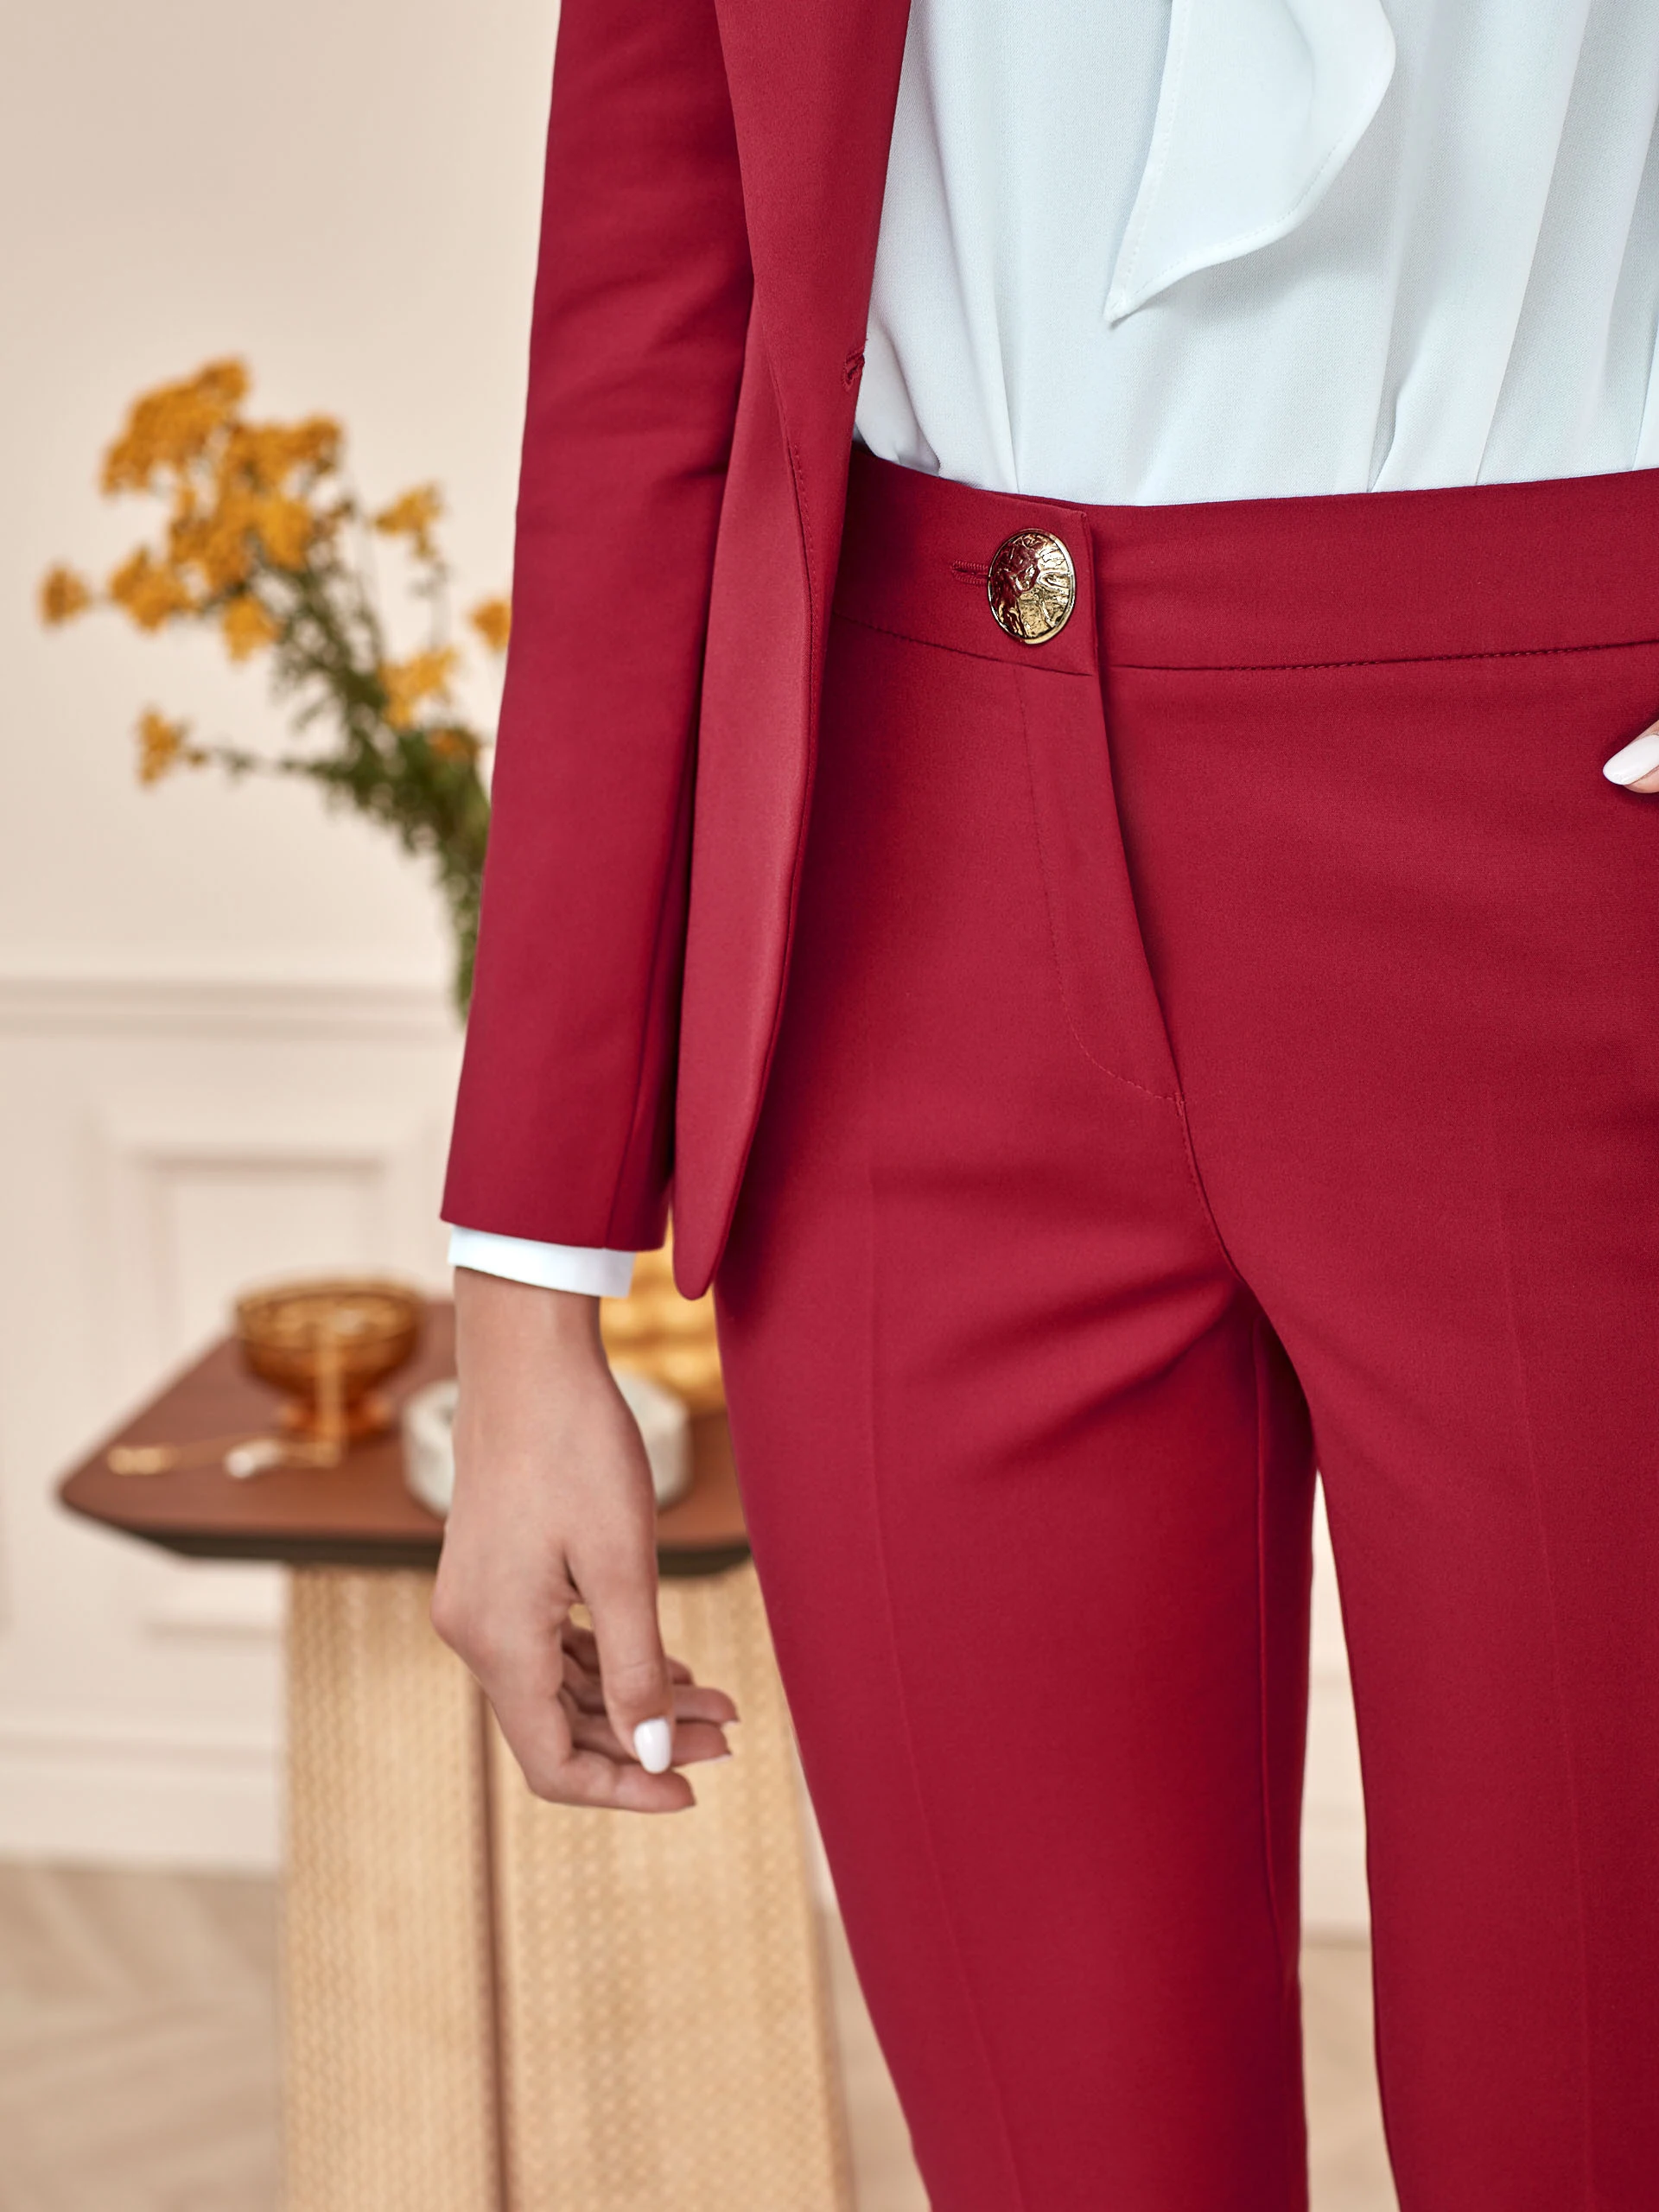 BURGUNDY JACKET WITH GOLD BUTTONS